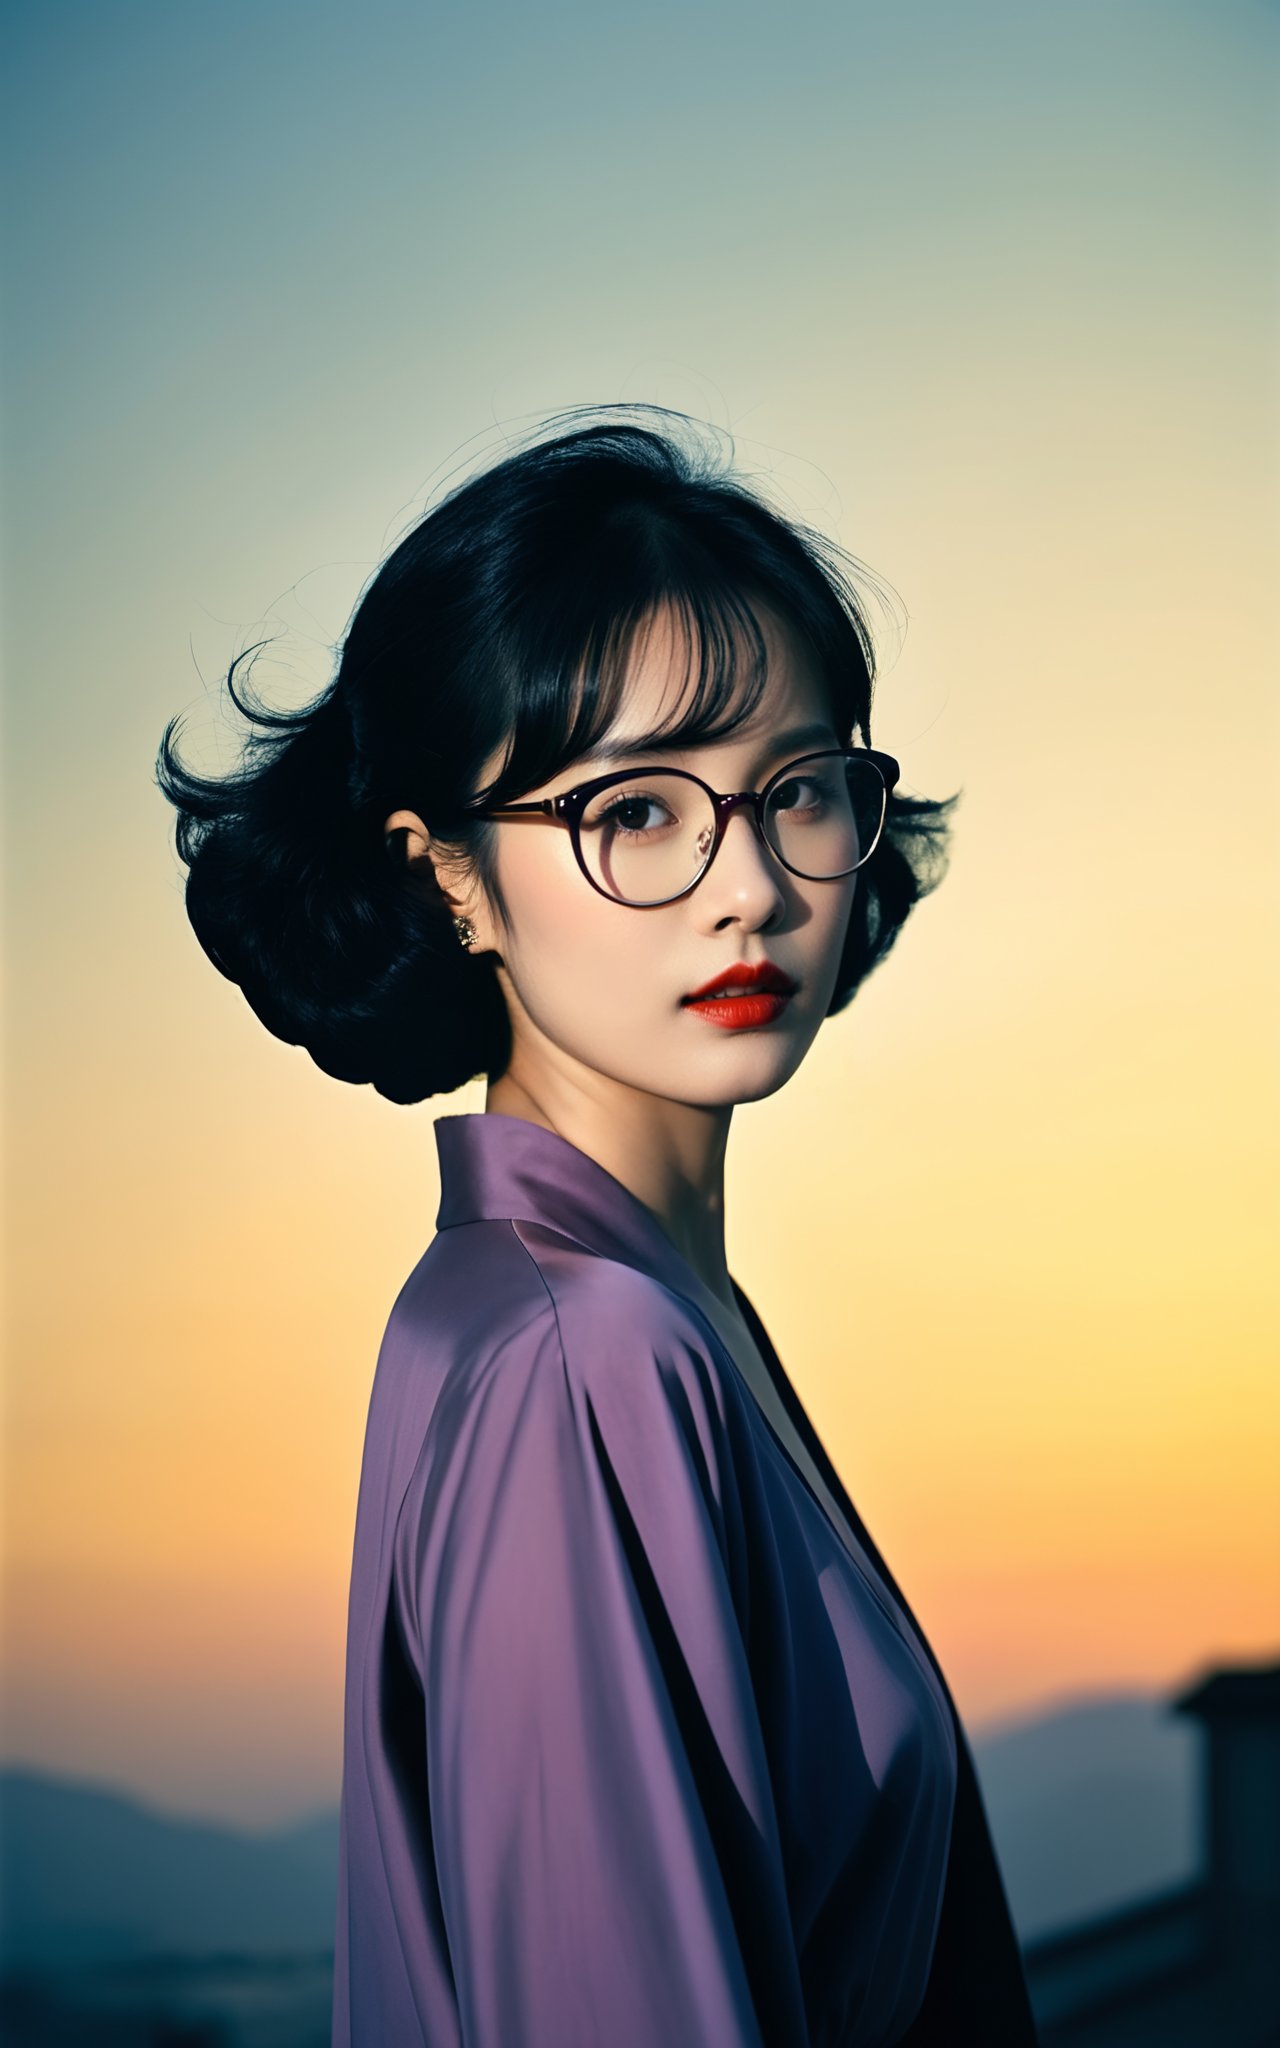 by Ken Loach,photograph,a chinese woman 1950s poodle skirtsed in her early 20s and black hair,wields an elegant Browline glasses,beckoning her viewers to take on the surreal landscape. The sun is shining brightly in the sky,casting a golden glow over the scene. Rough sketch,Grim,Animecore,Cold Lighting,double exposure,Kodak Ektar 100,F/5,sharp and in focus,(key visual, cinematic purple Color grading),